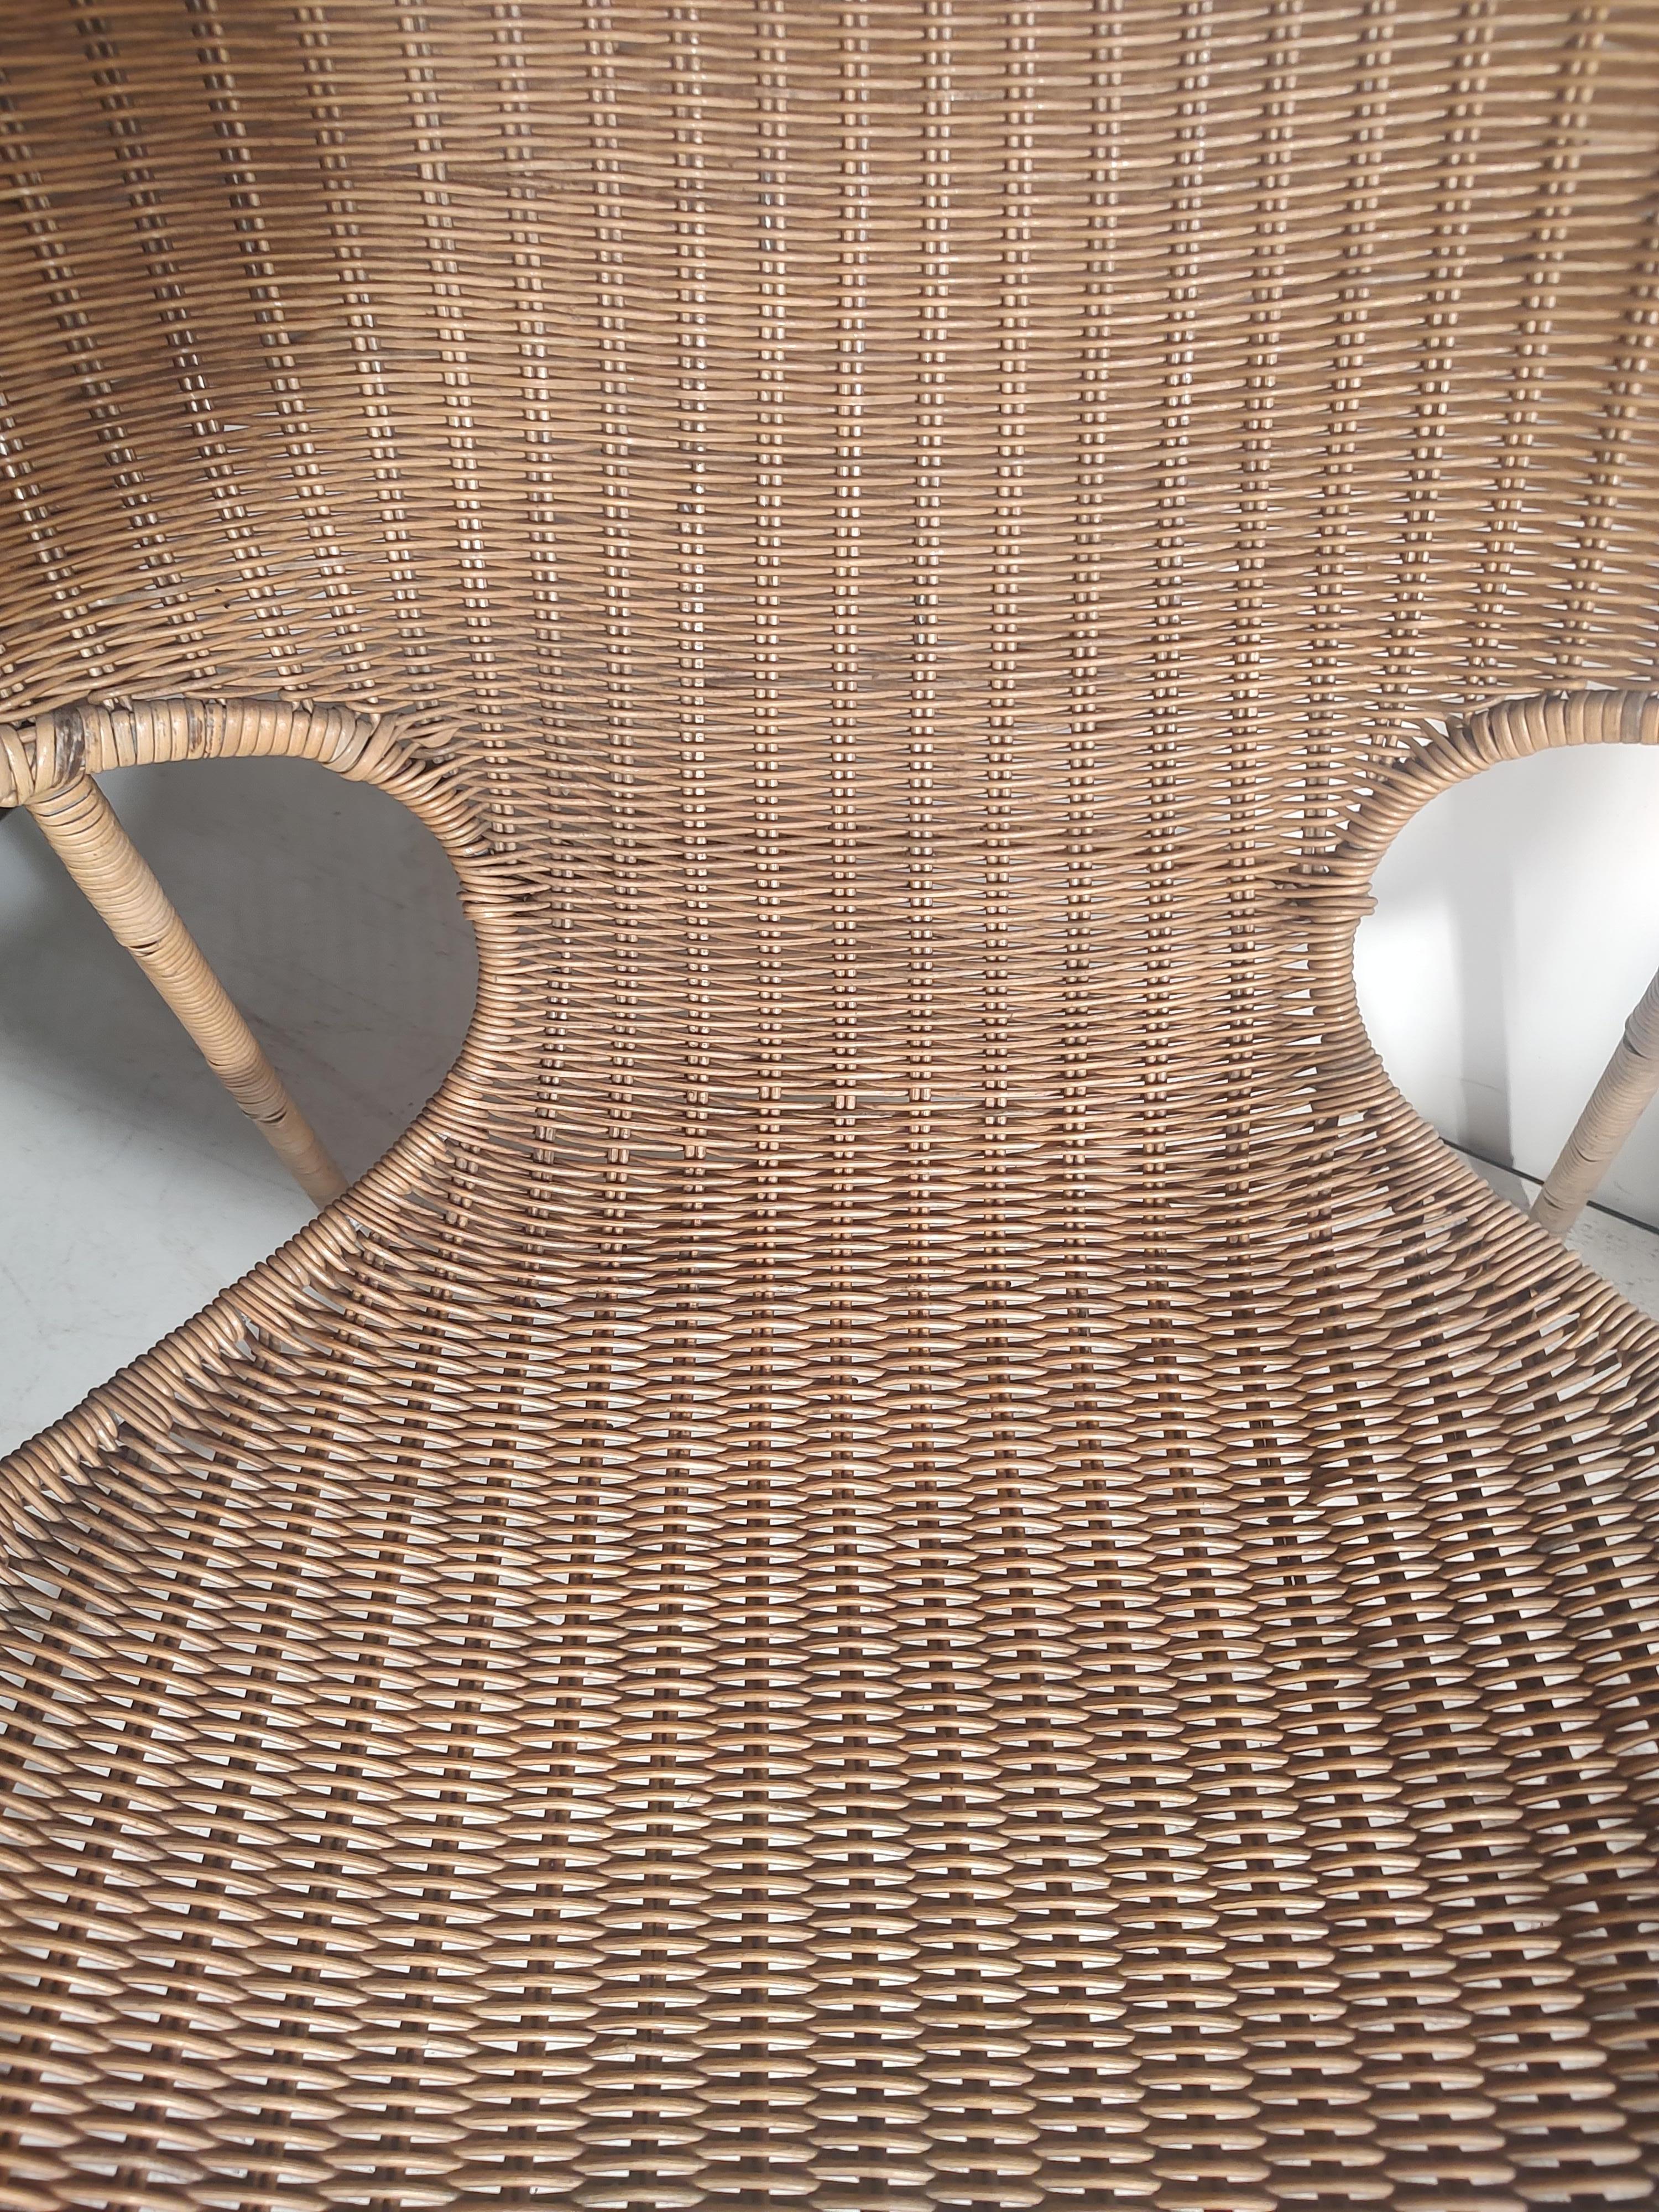 Pair of Mid Century Modern Sculptural Wicker & Iron Lounge Chairs Francis Mair  For Sale 5